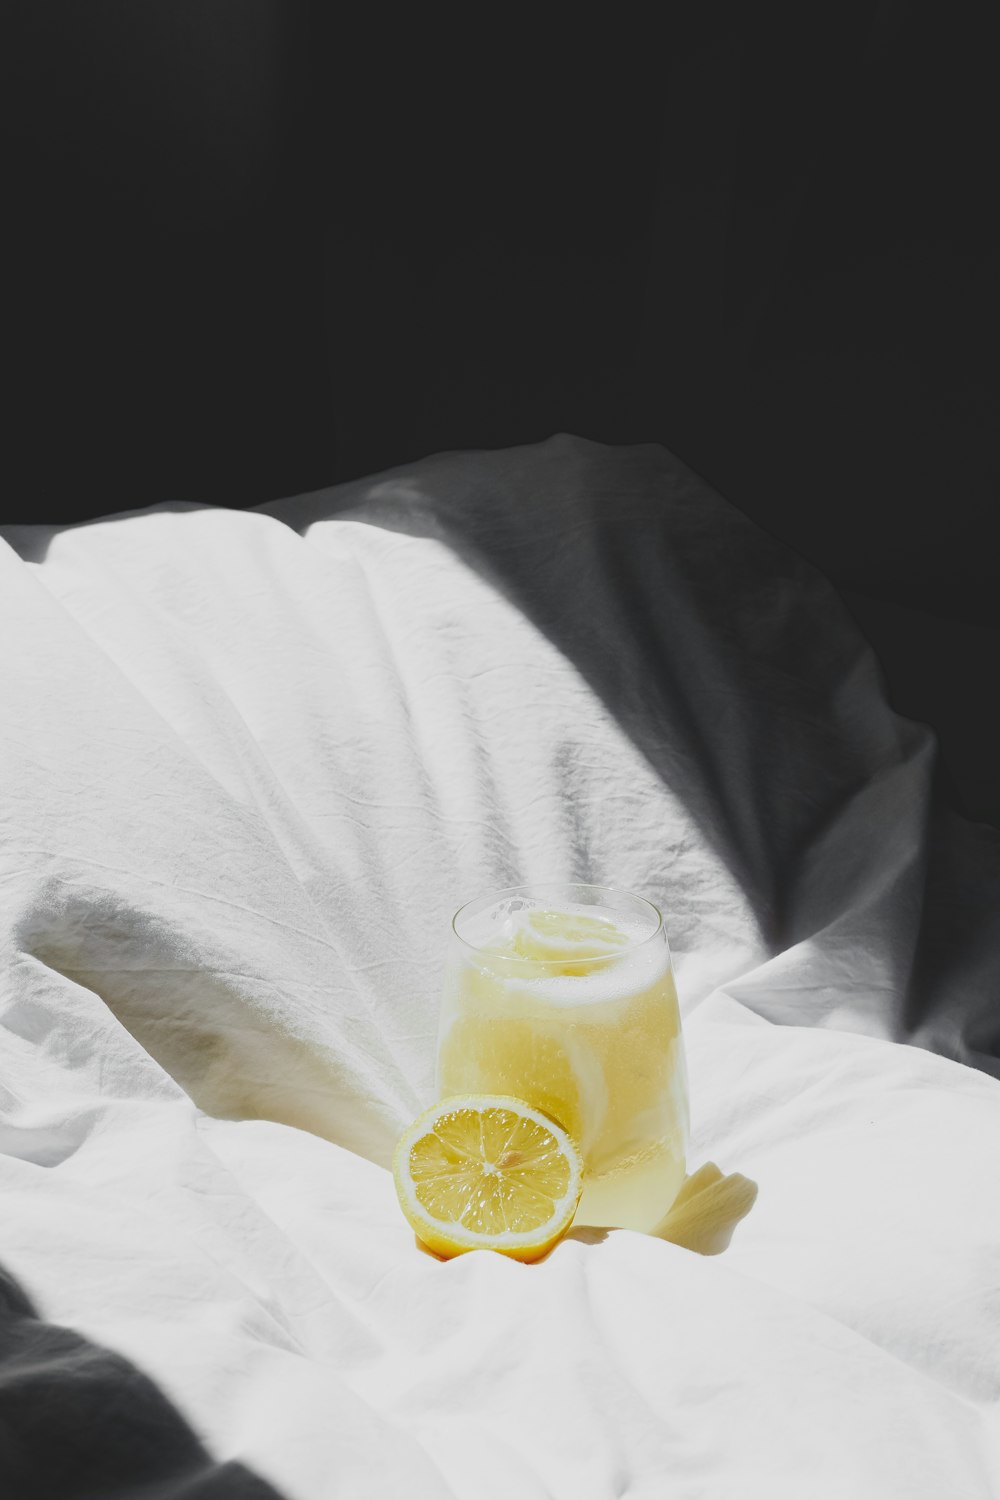 a glass of lemon juice sitting on a bed